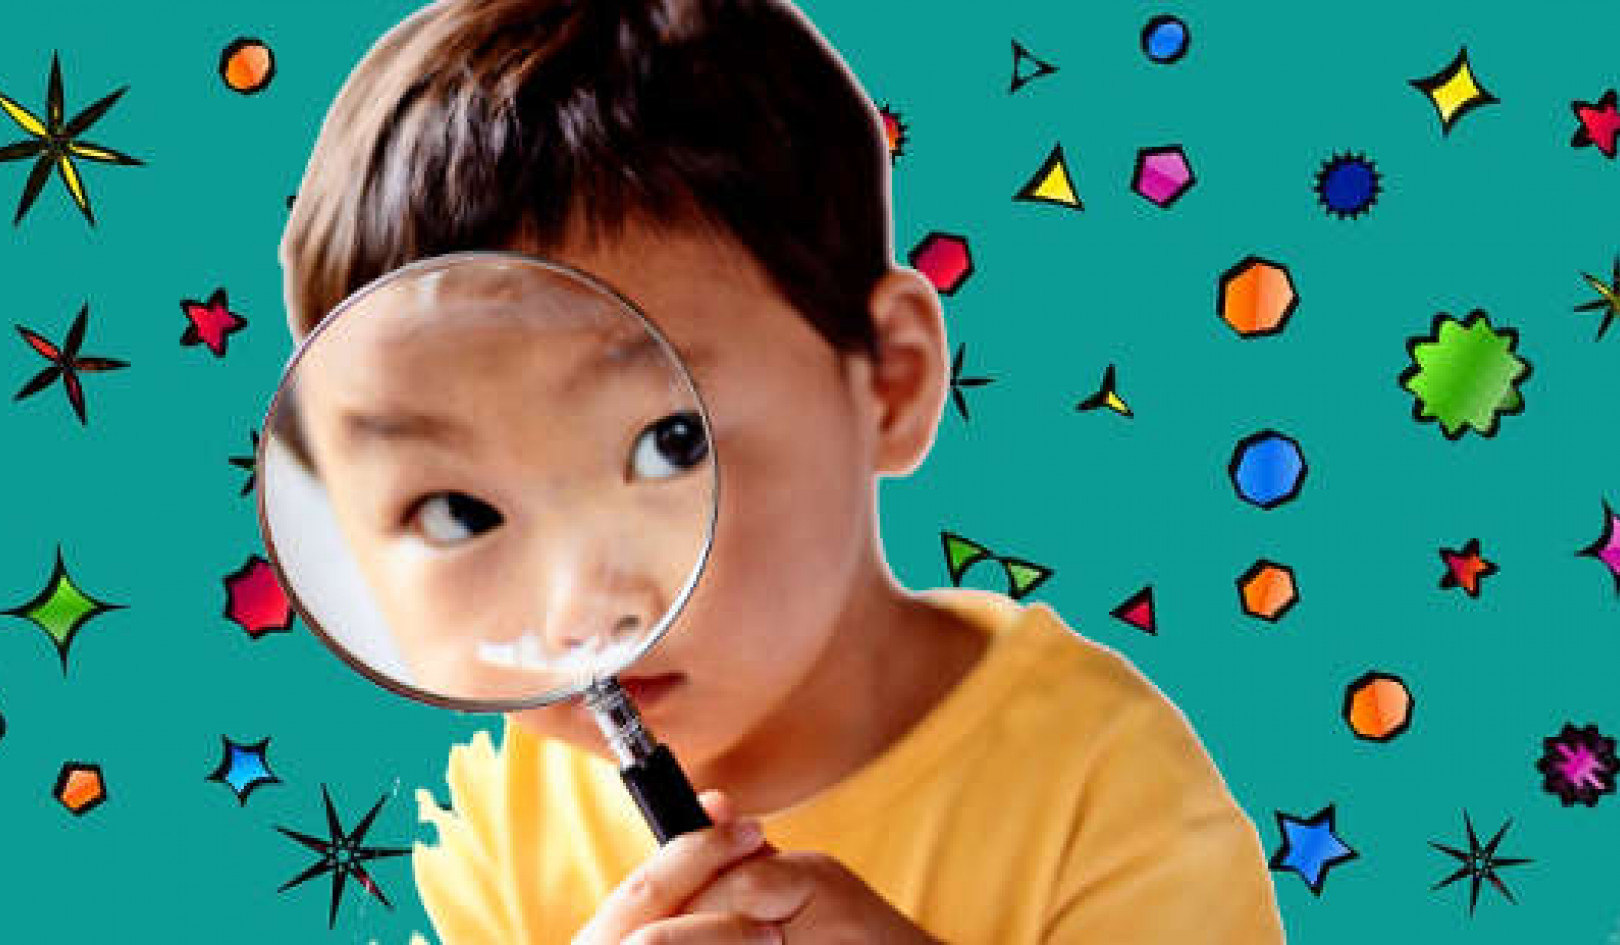 To spark curiosity, don’t tell preschoolers too much or too little